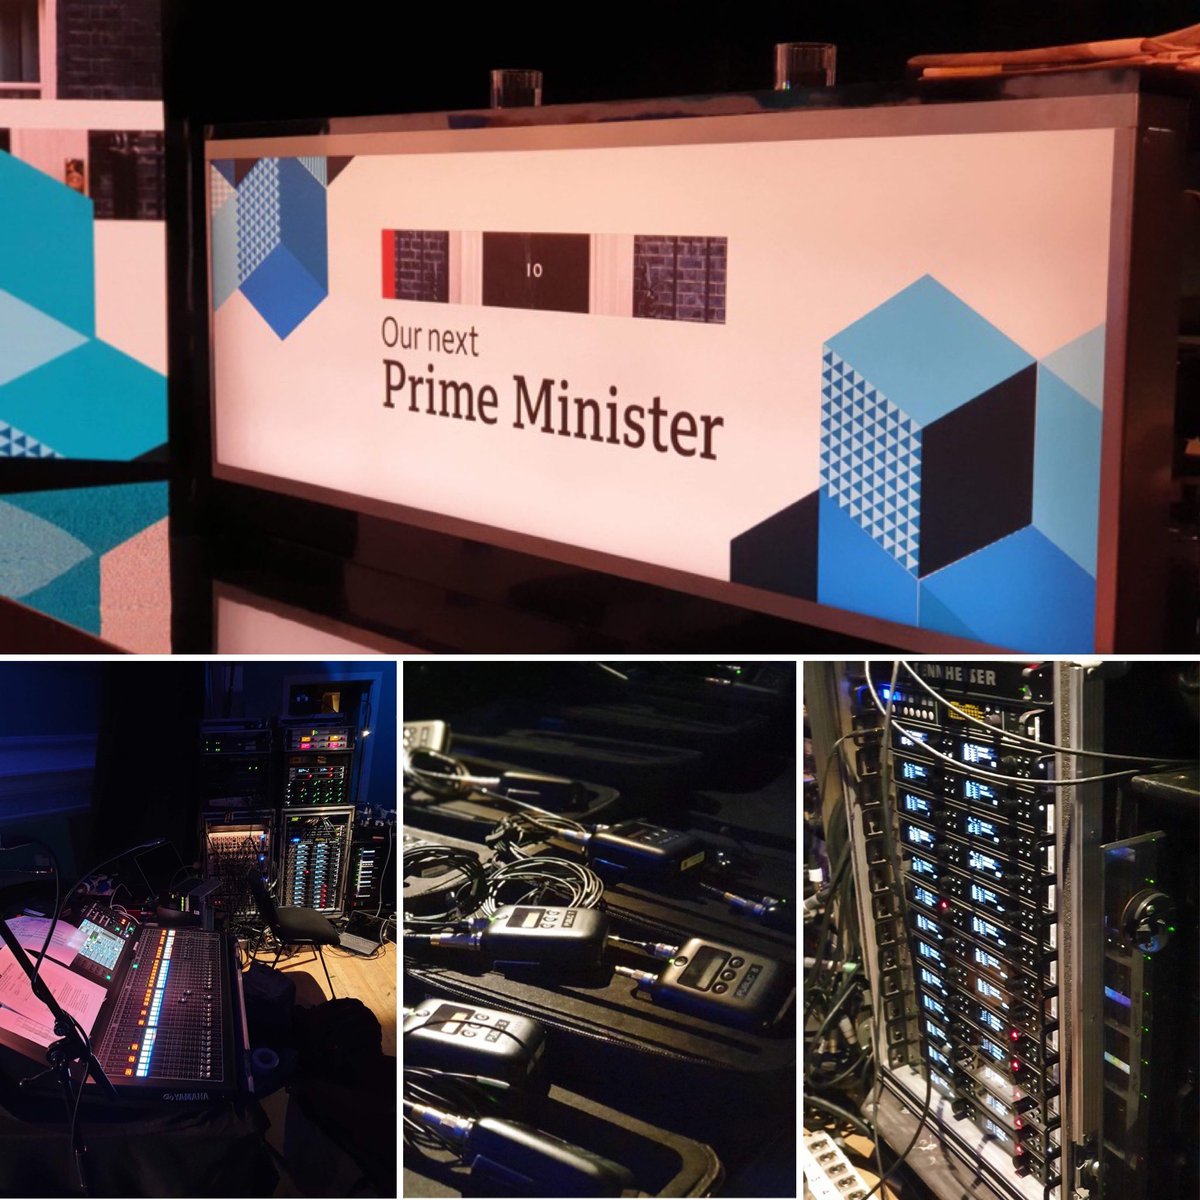 Many thanks to @robhillmedia for kindly sending these photos of the @cloudbassob team in action last night for the ‘#OurNextPrimeMinister’ BBC1 debate from Stoke-on-Trent.

9 camera OB with @luna_remote_systems for the 270degree curve track & Rob himself on Steadicam.

#Cloudbass